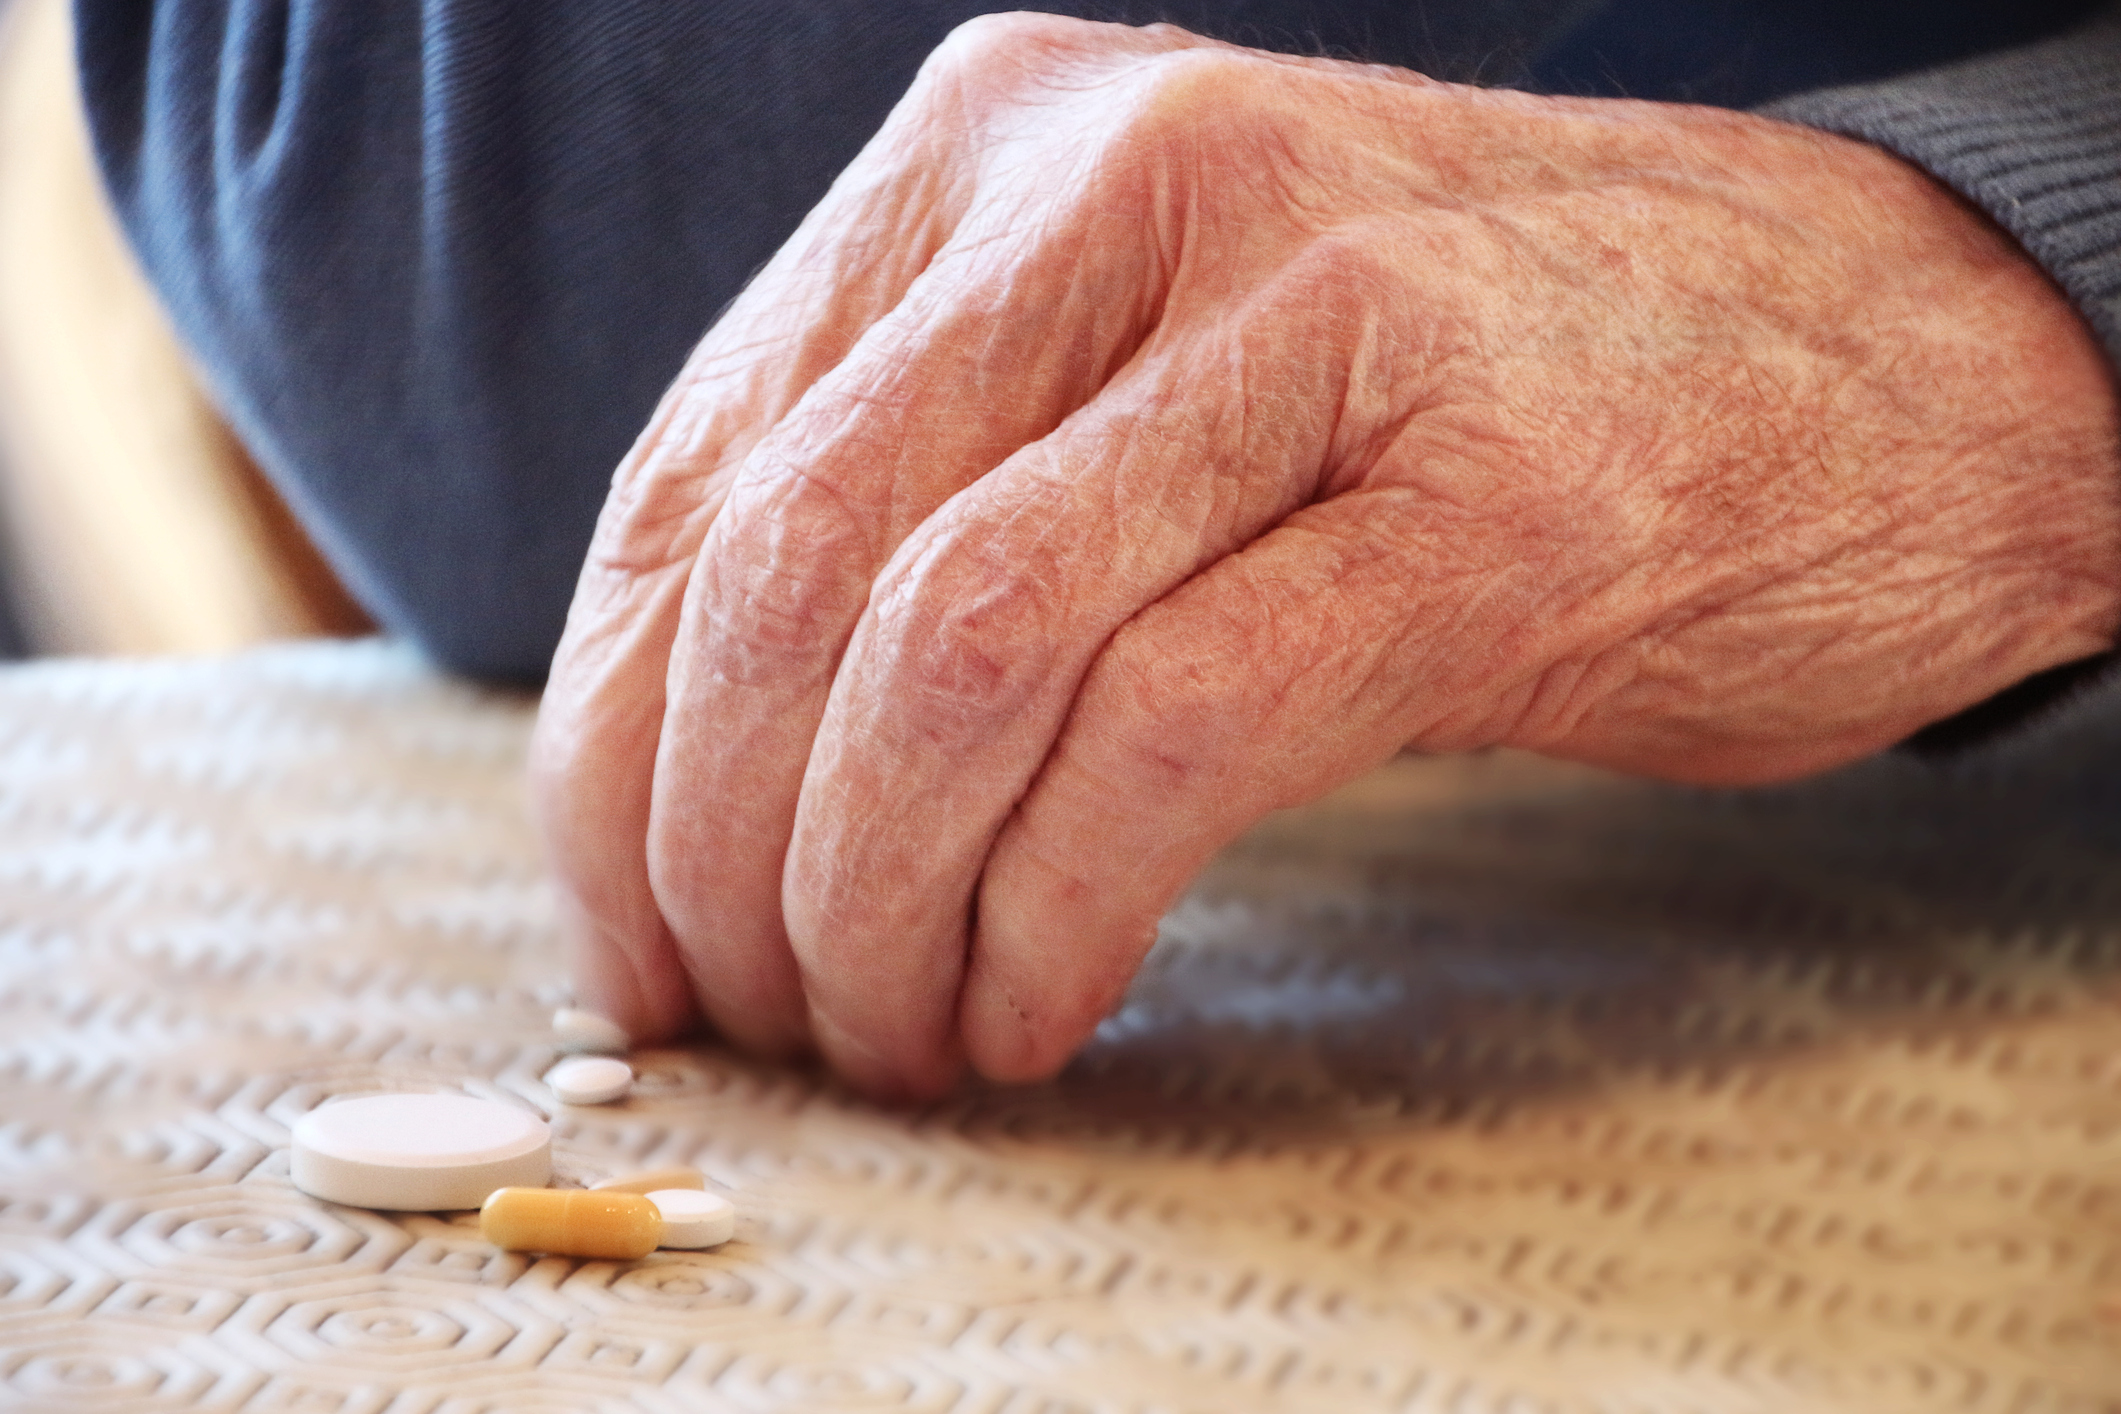 An elderly man taking his pills. (Getty Images)